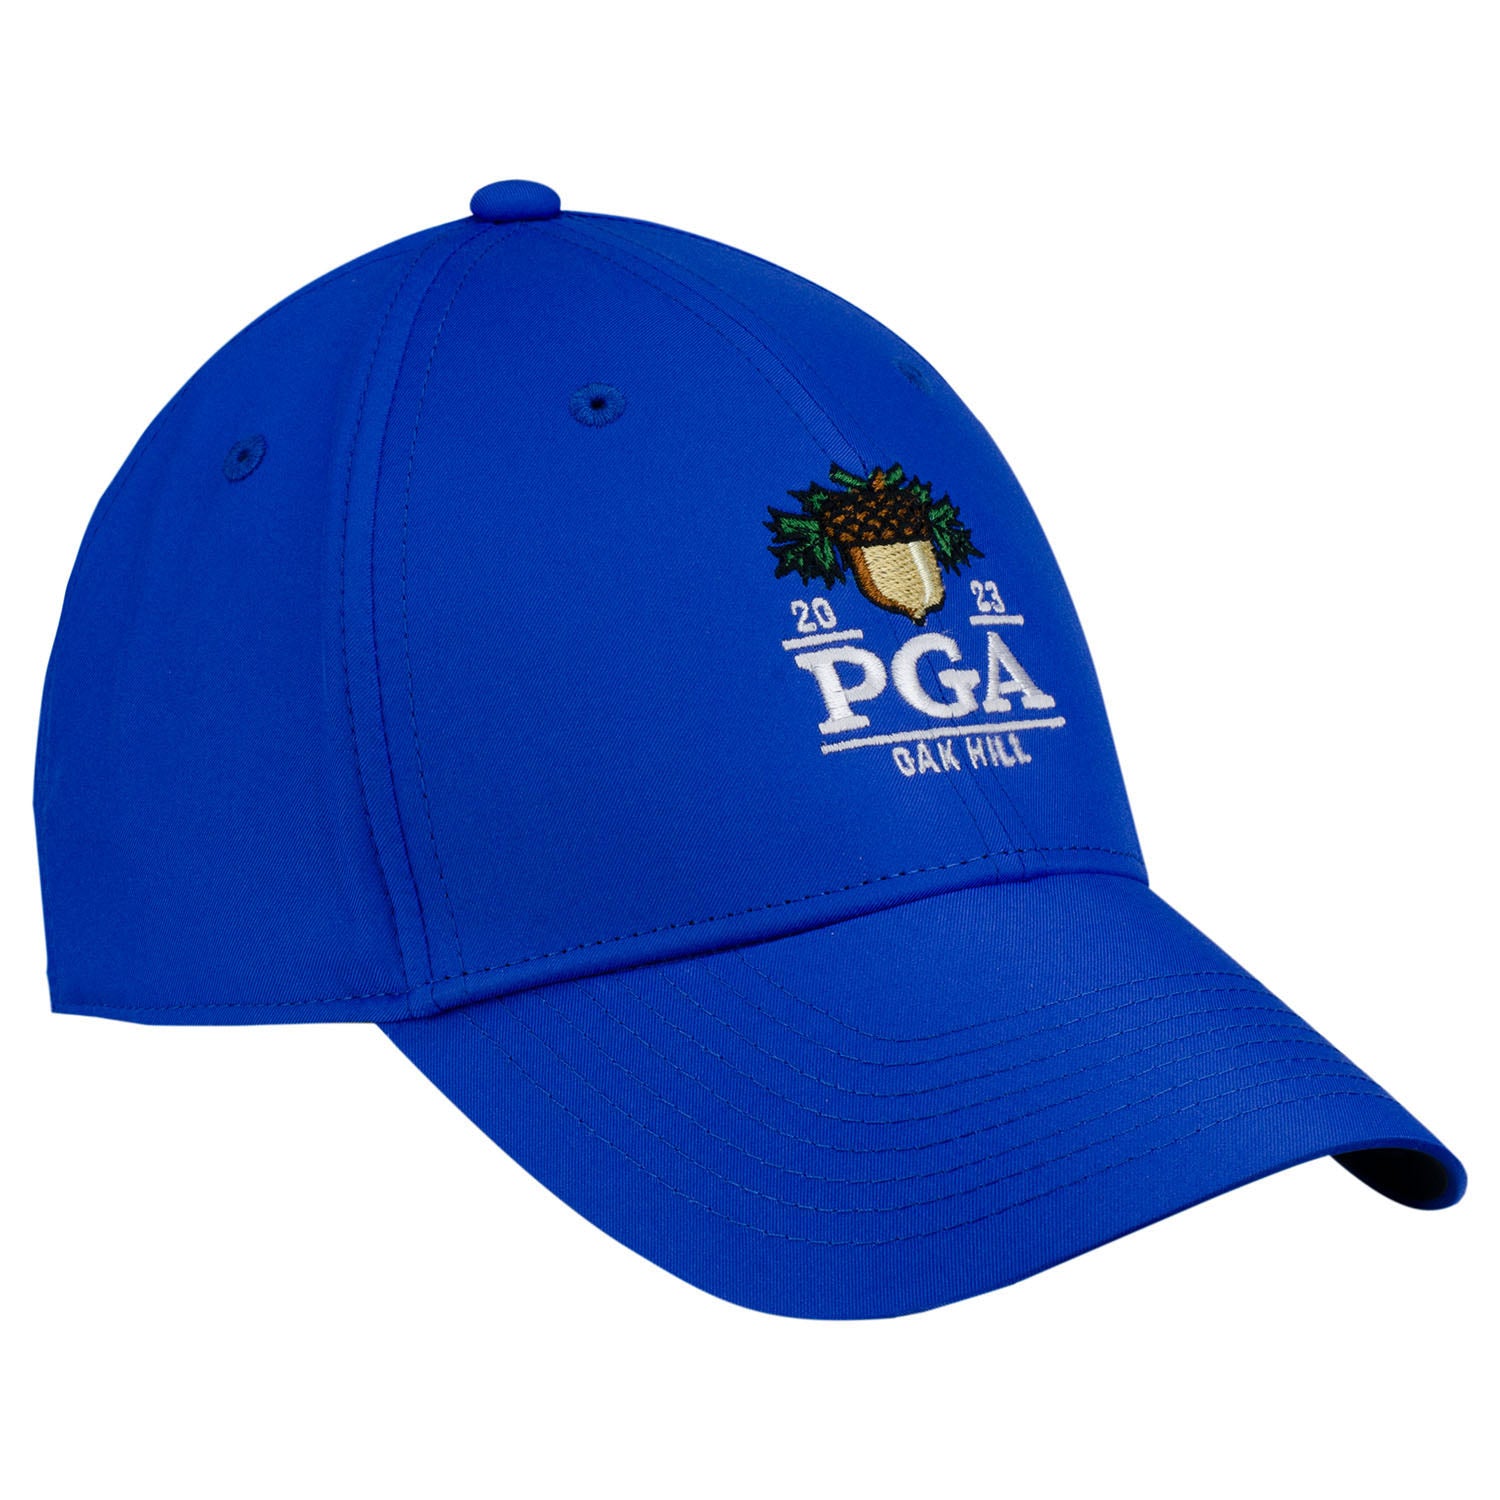 2023 PGA Championship Hats For Sale The Official Store of the PGA